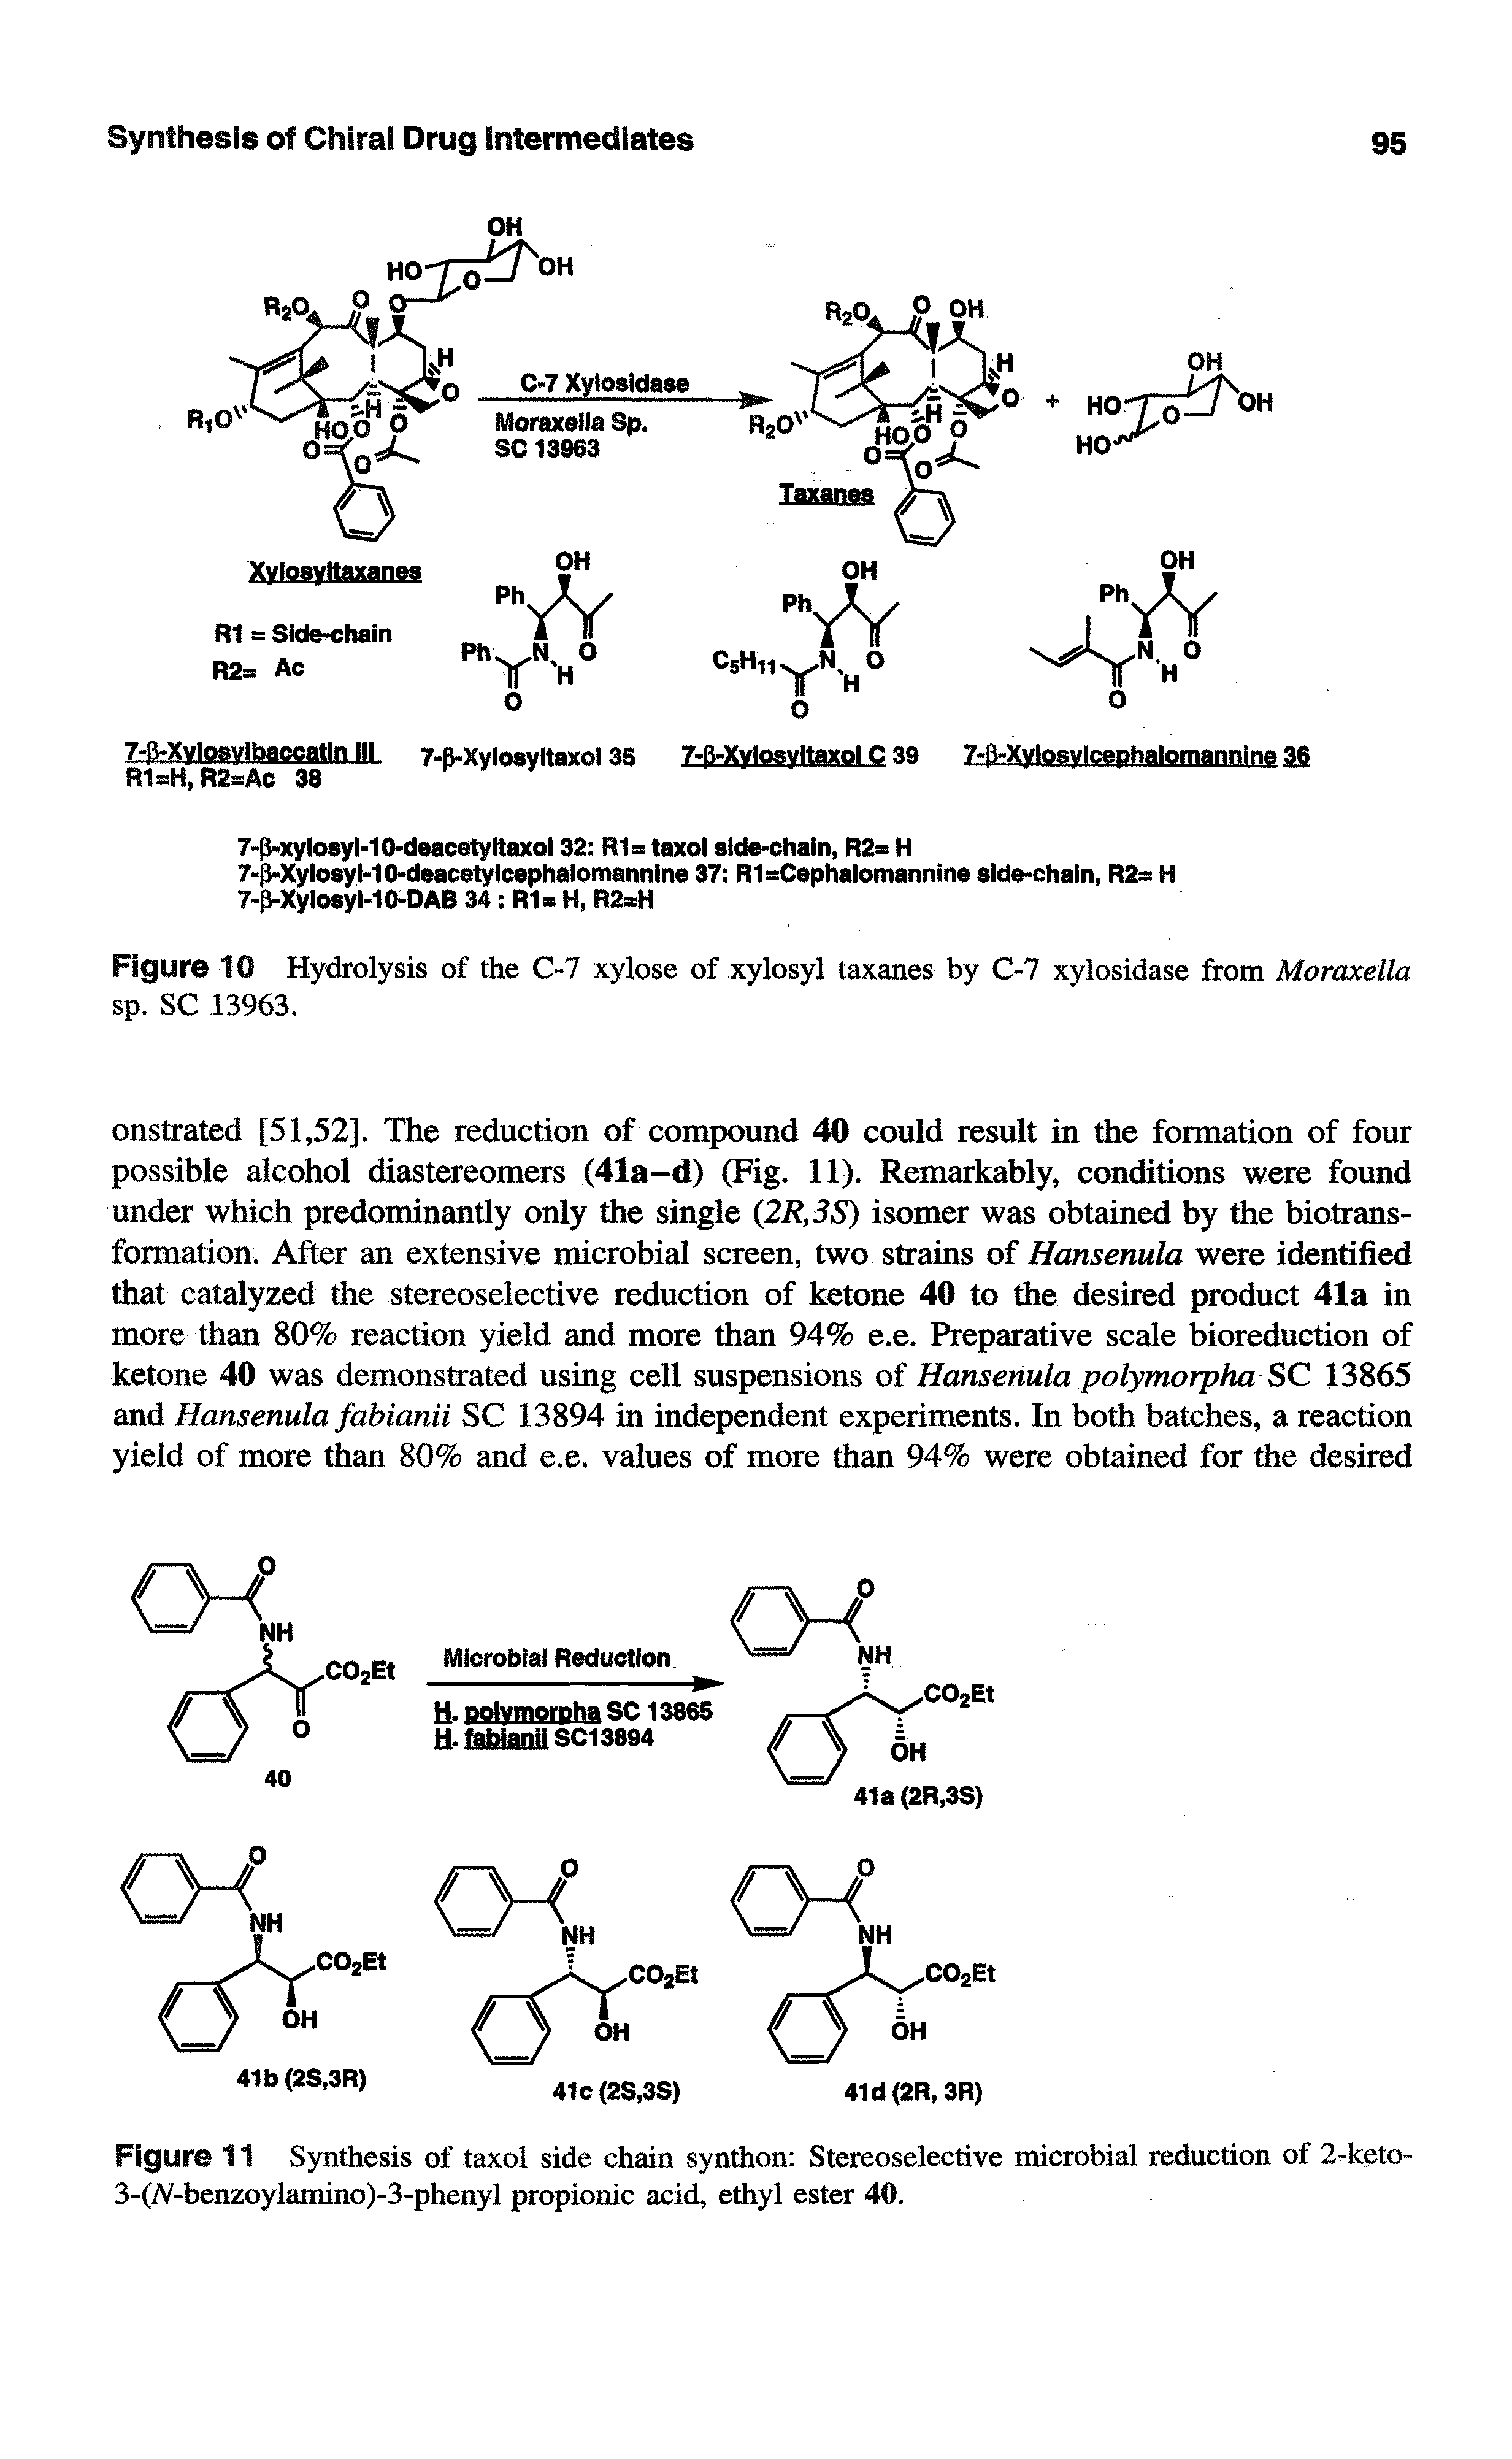 Figure 11 Synthesis of taxol side chain synthon Stereoselective microbial reduction of 2-keto-3-(iV-benzoylamino)-3-phenyl propionic acid, ethyl ester 40.